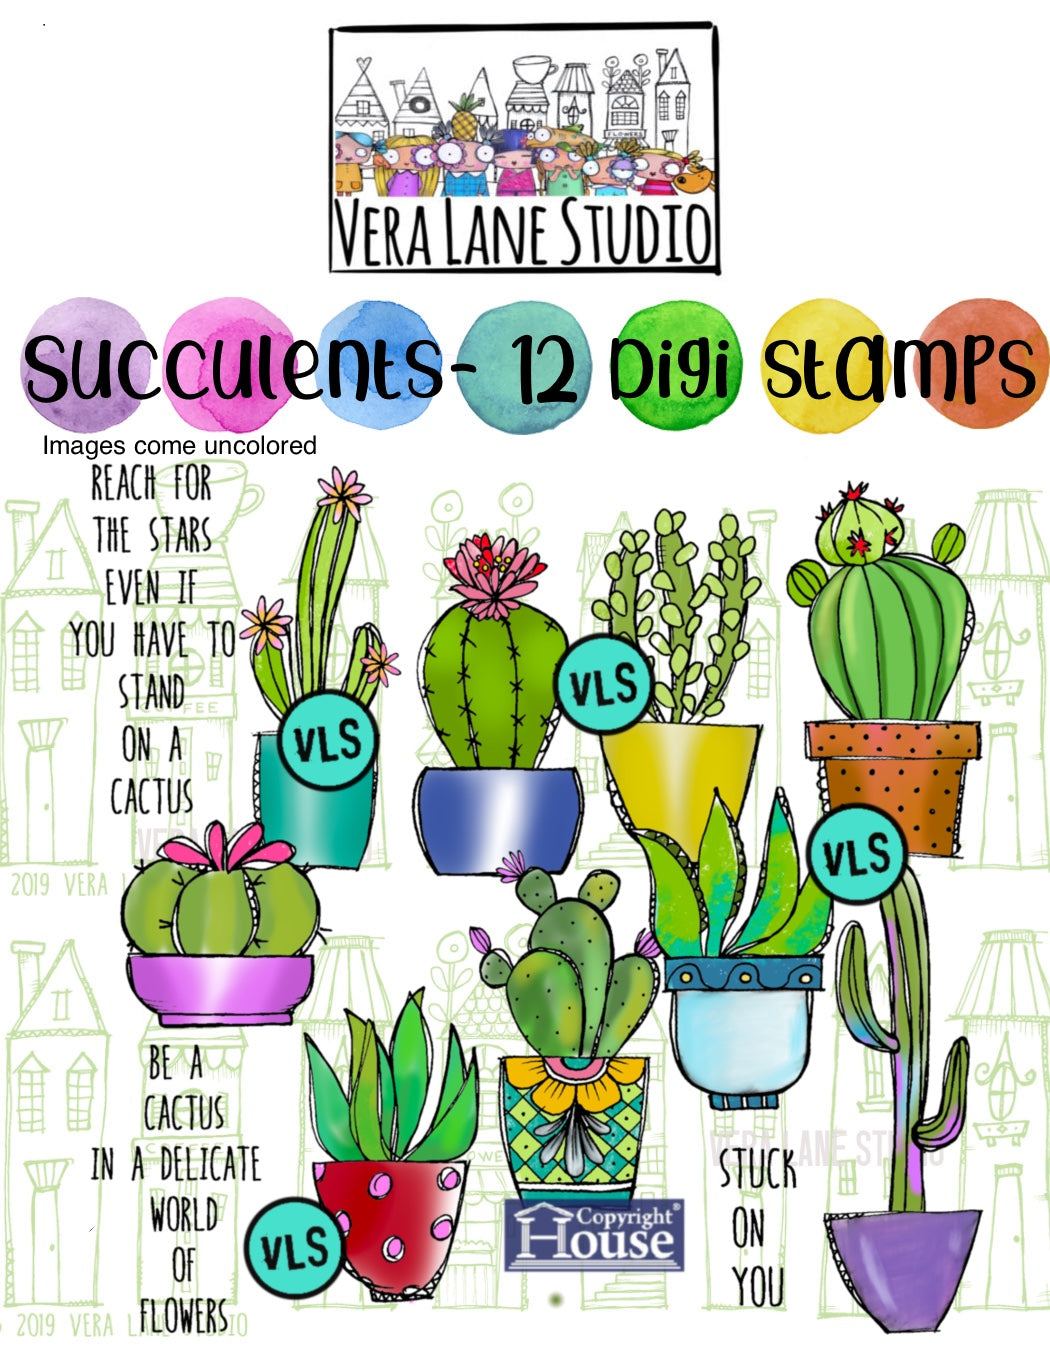 Succulents - 12 Digi stamps in jpg and png files